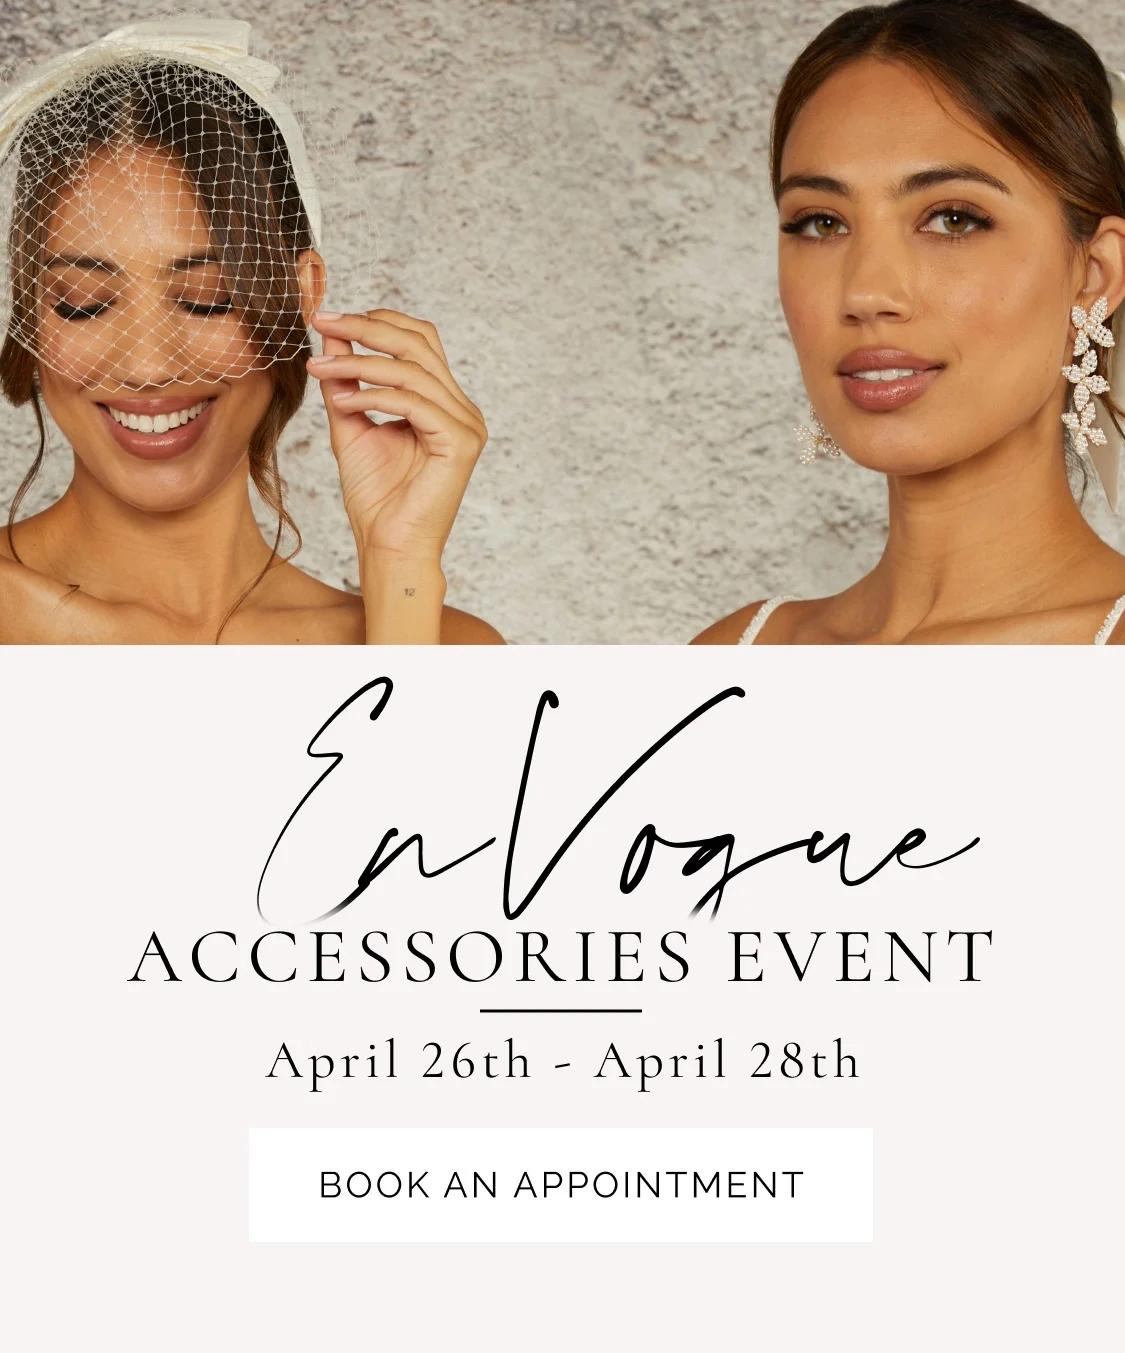 EnVogue Accessories Event banner for mobile